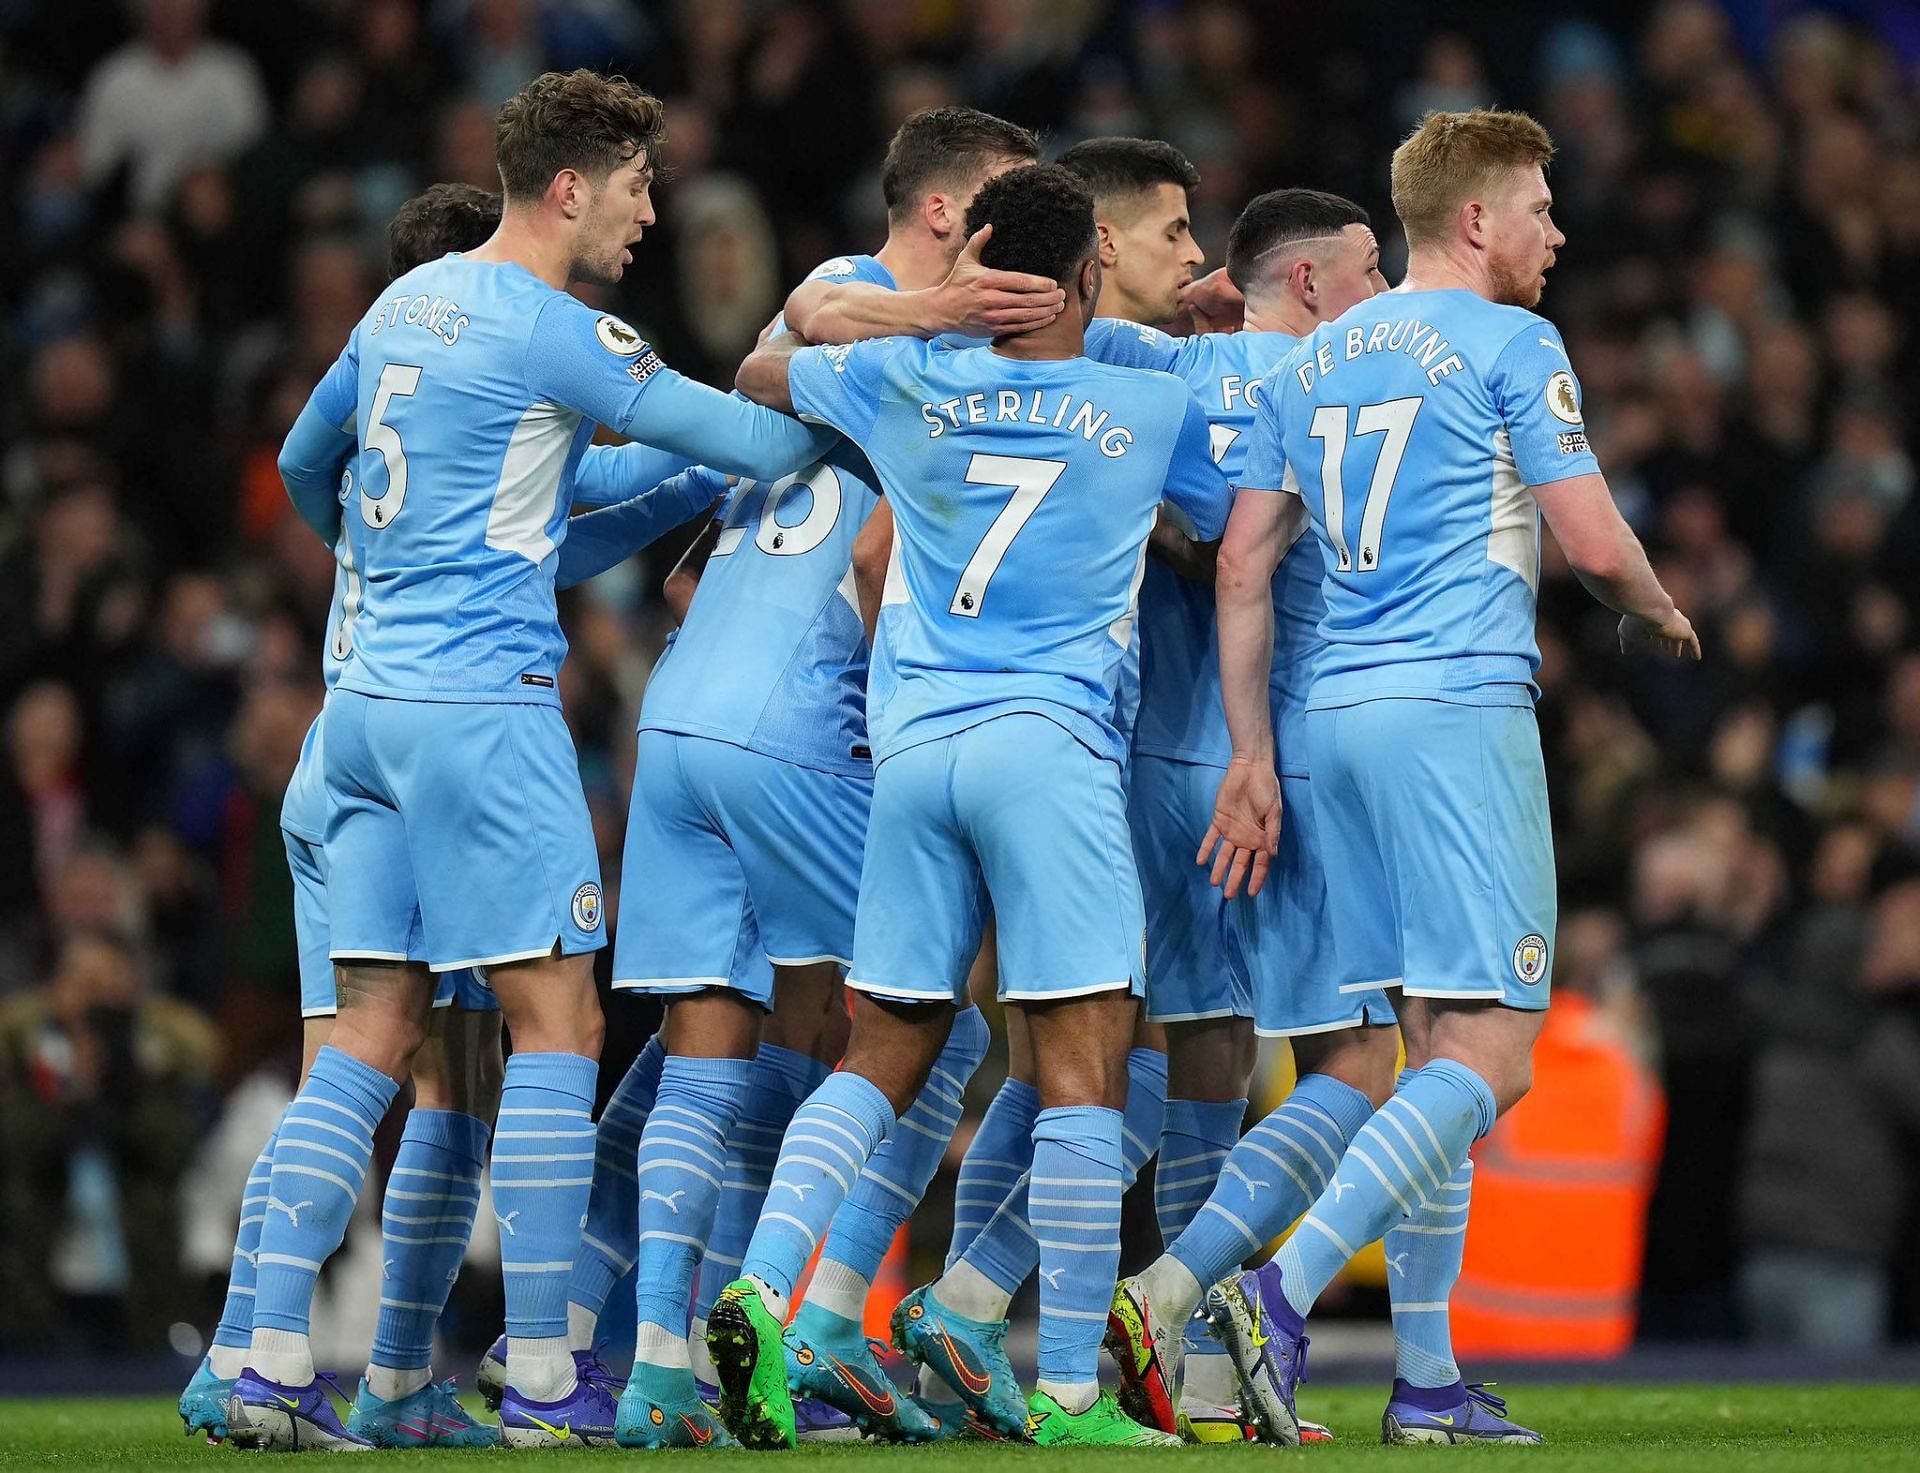 Manchester City recorded a routine win over Brentford in the Premier League on Wednesday.